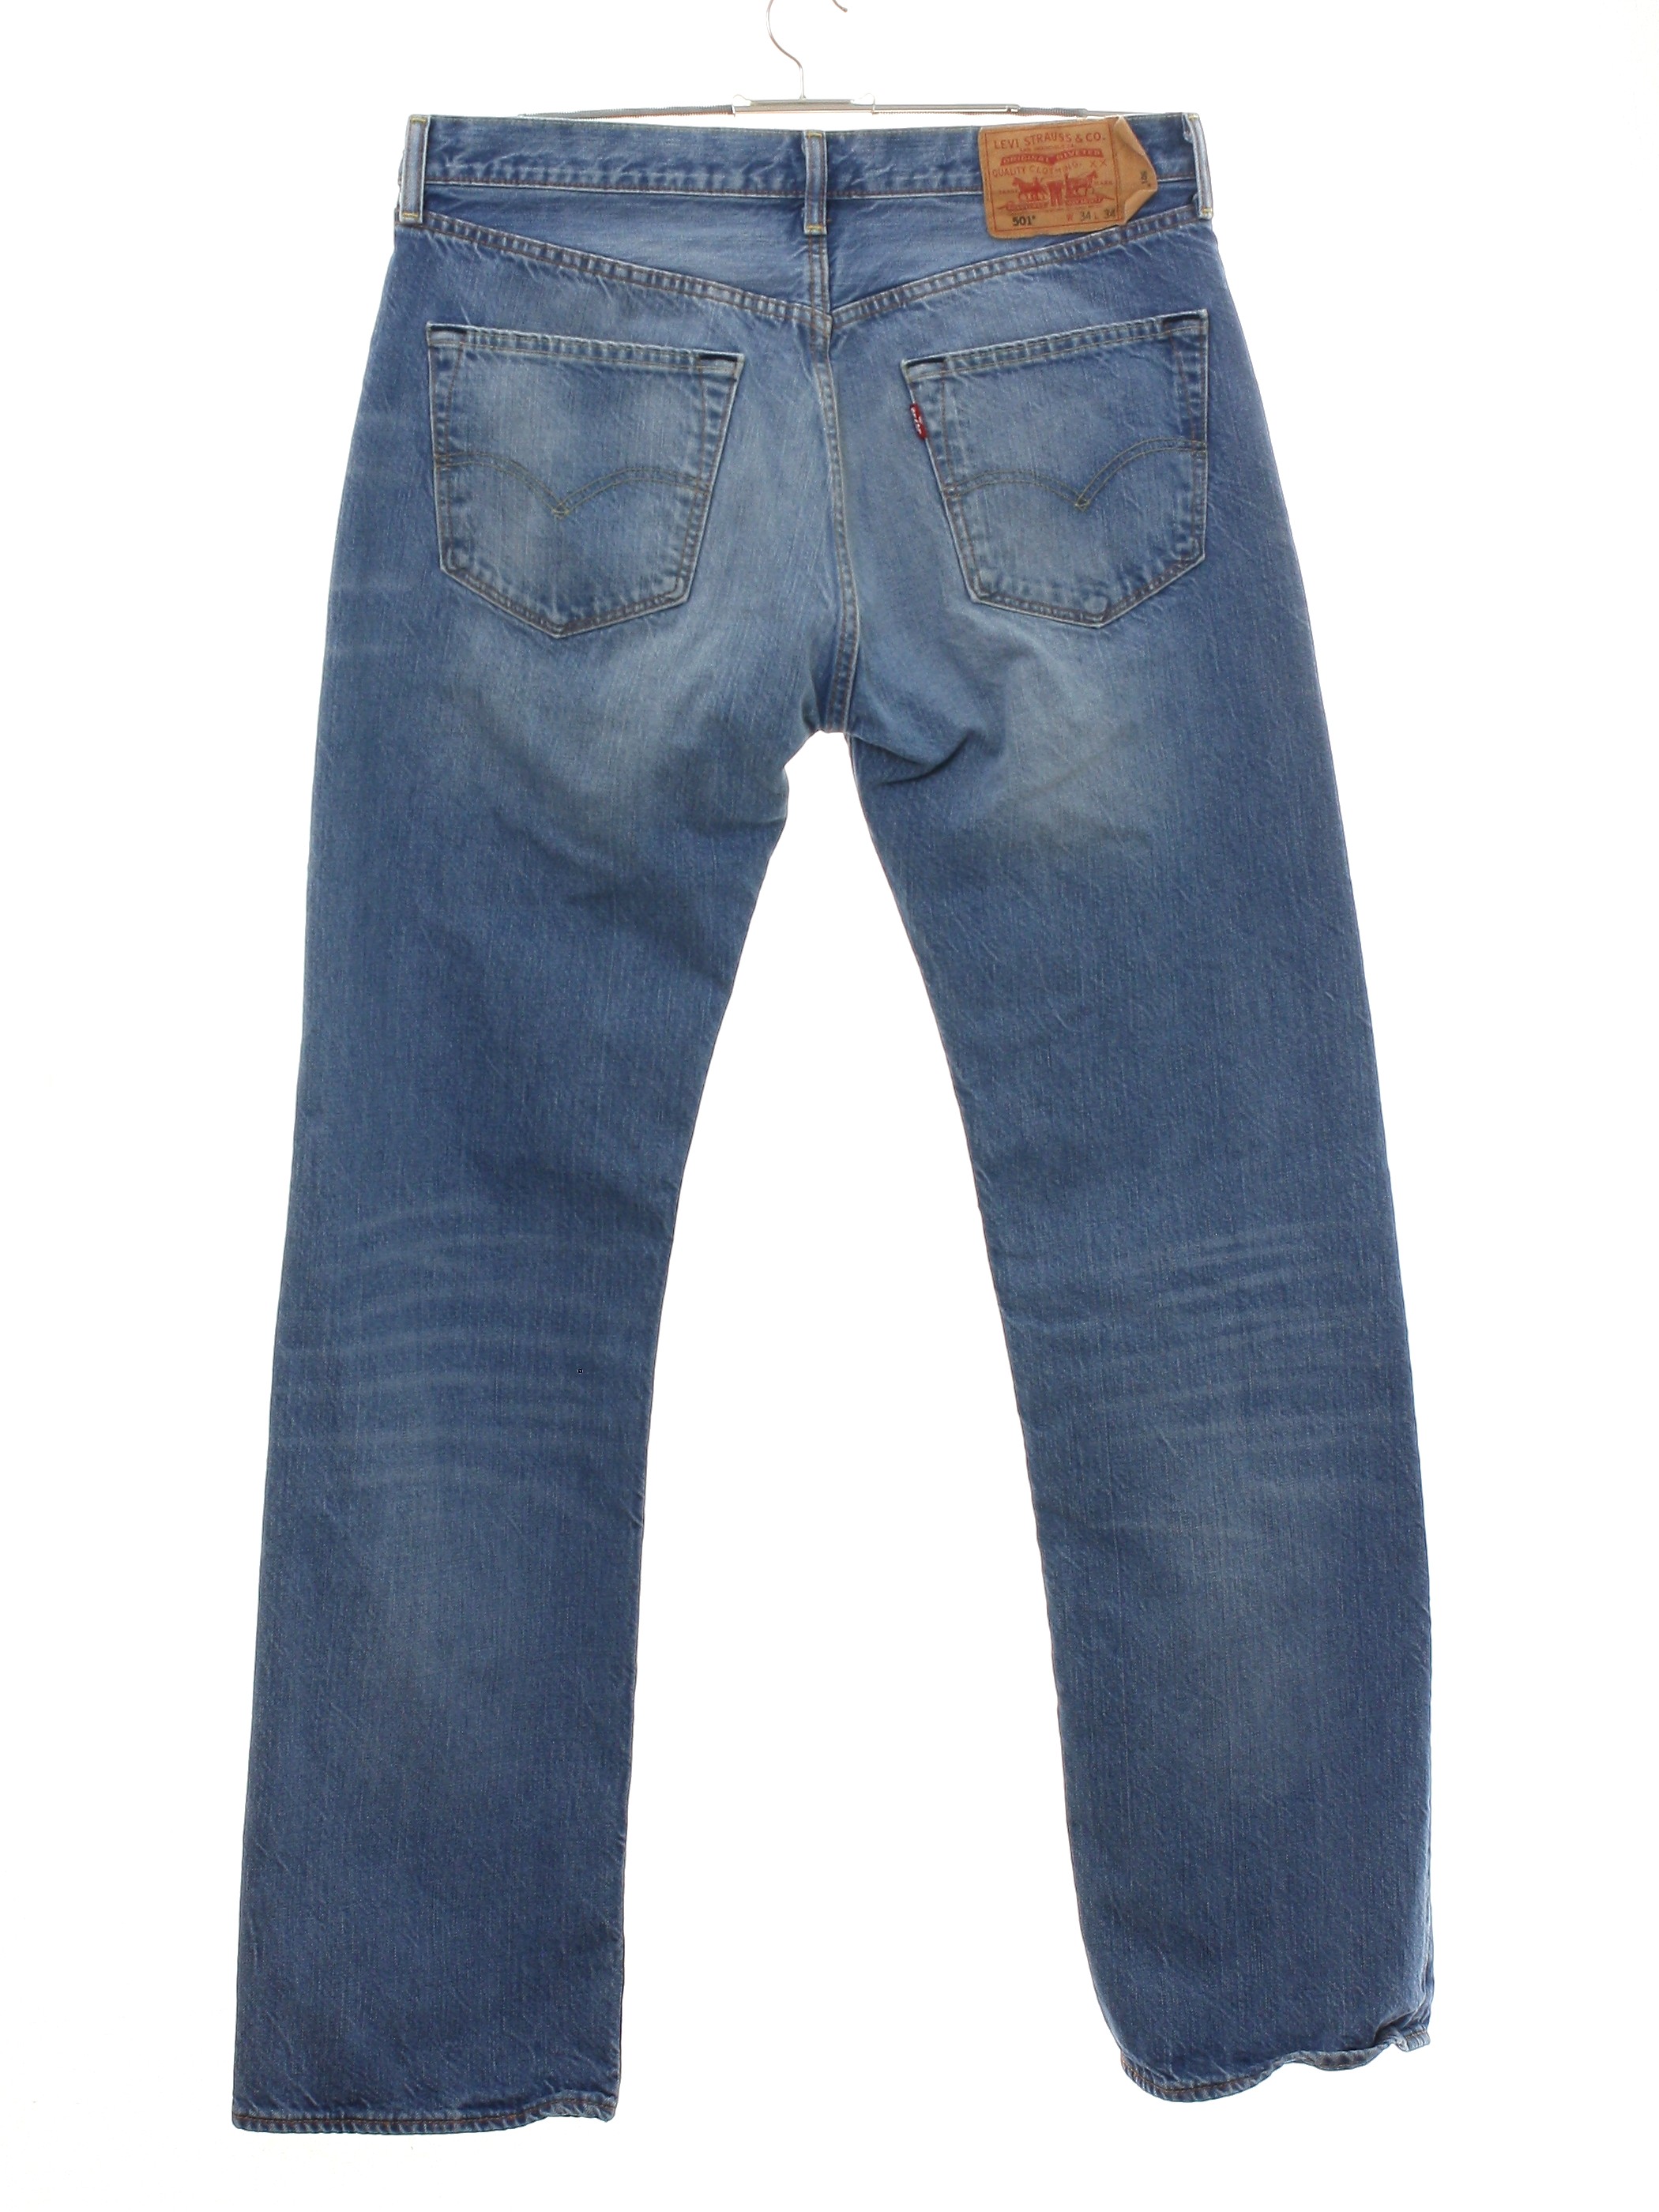 Pants: 90s -Levis 501- Mens stone washed faded hazy blue cotton ...